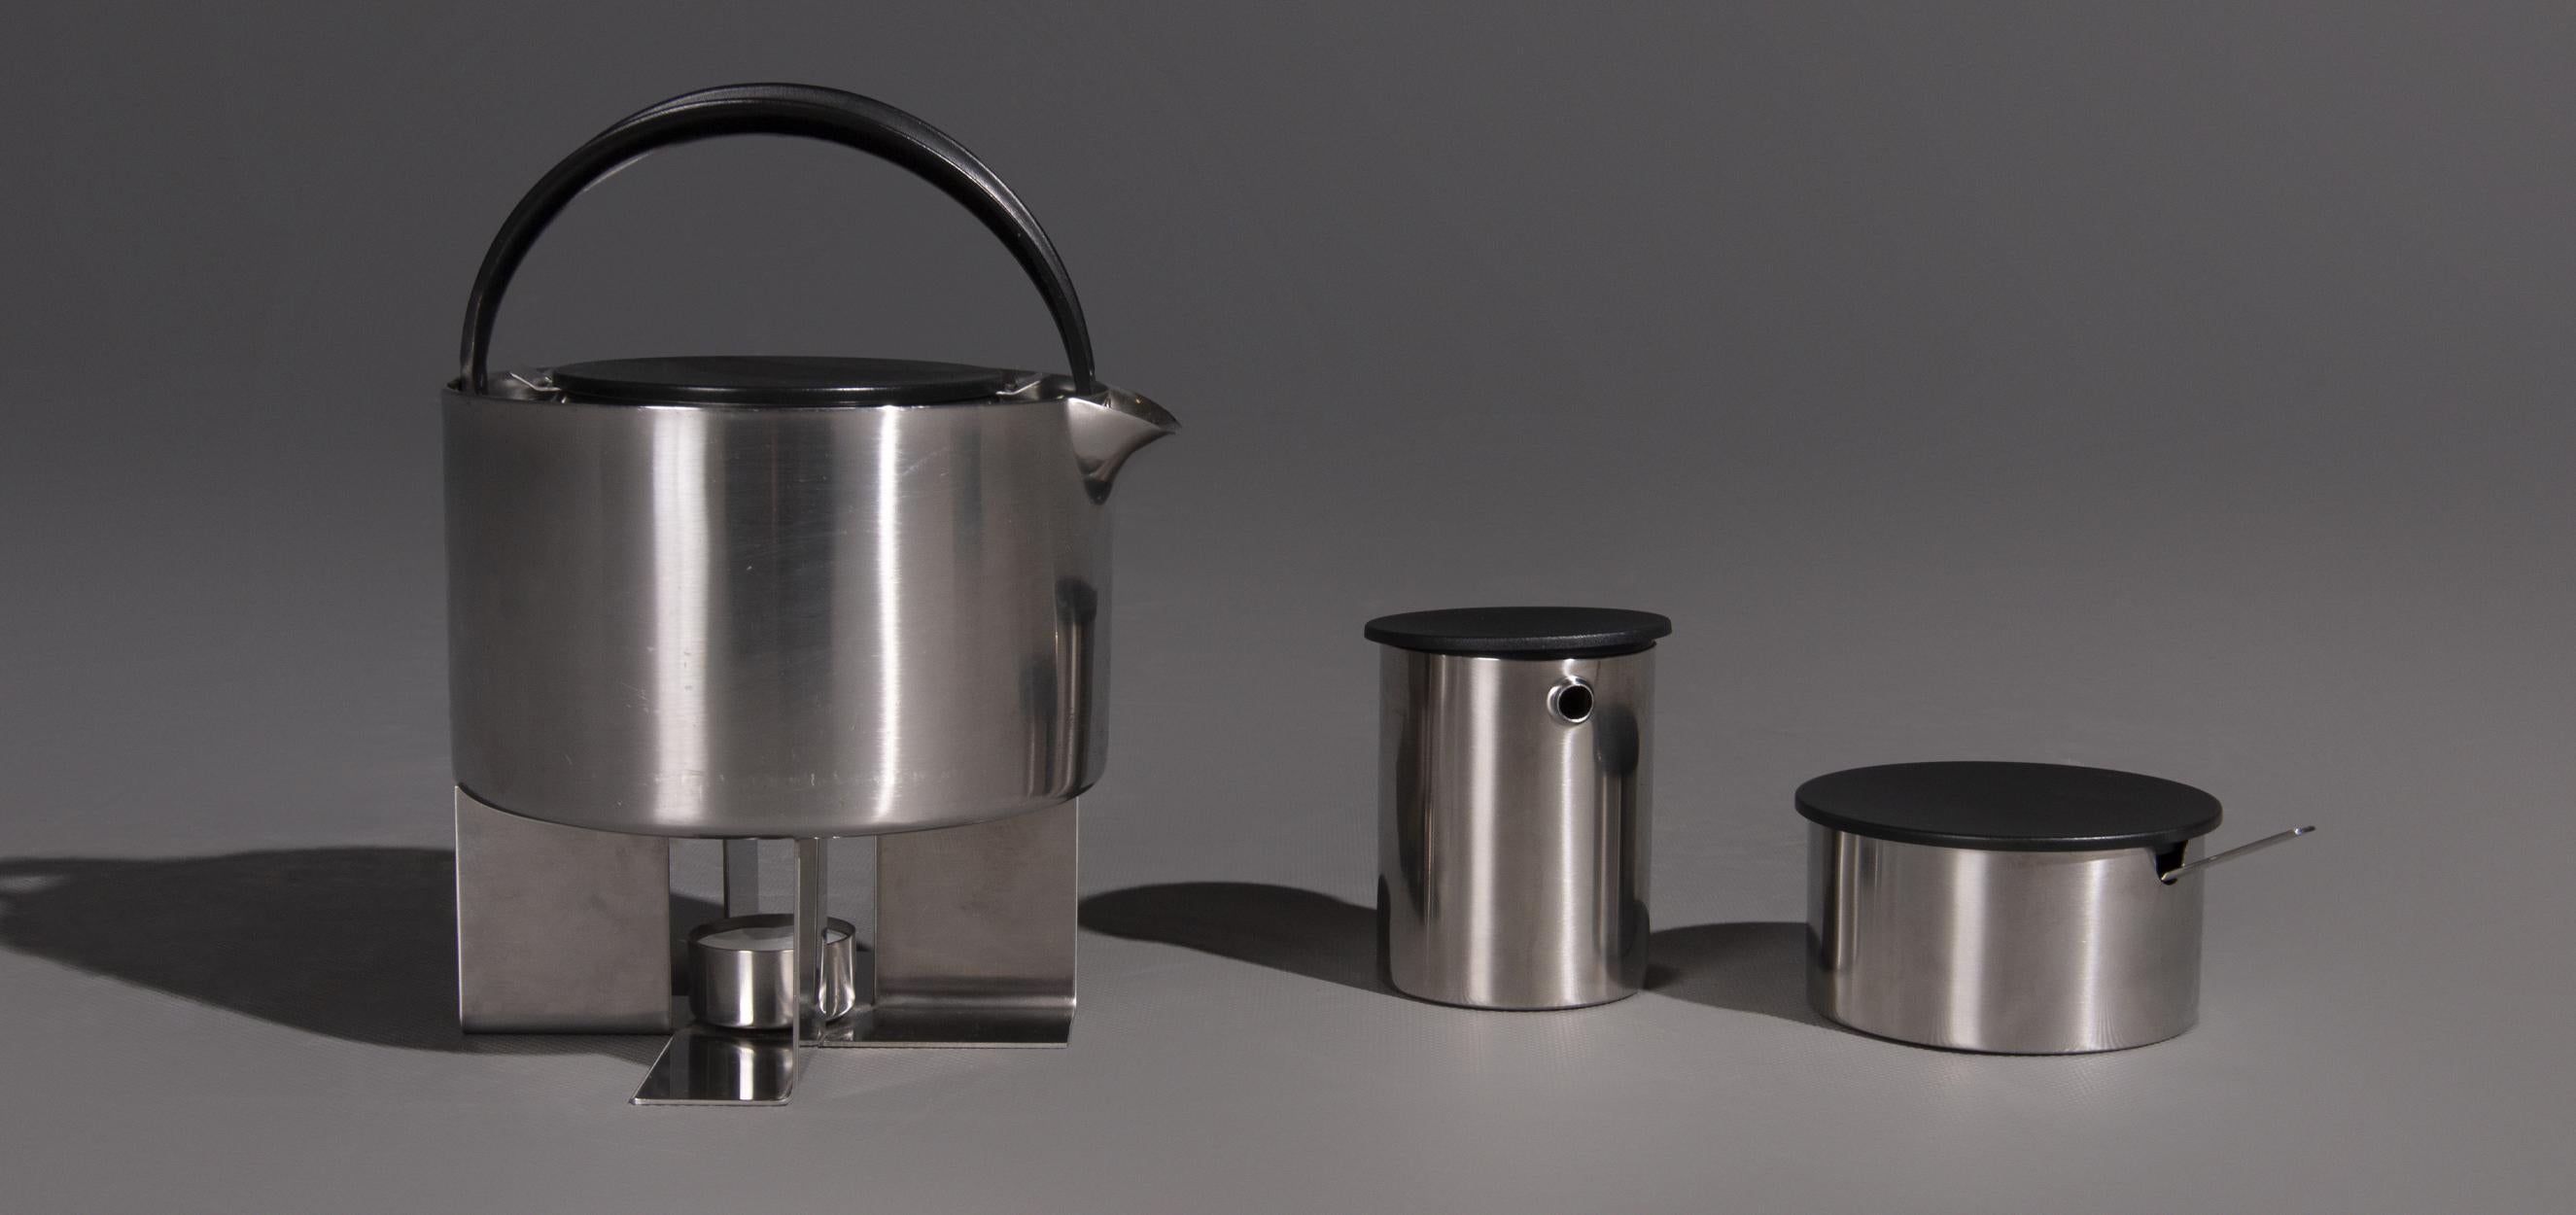 Tea set designed by Erik Magnussen for Stelton. These timeless design objects were designed by Erik Magnussen in 1977. The set has a very modern design and also has a beautiful function. The set is made of metal and plastic and is labeled at the